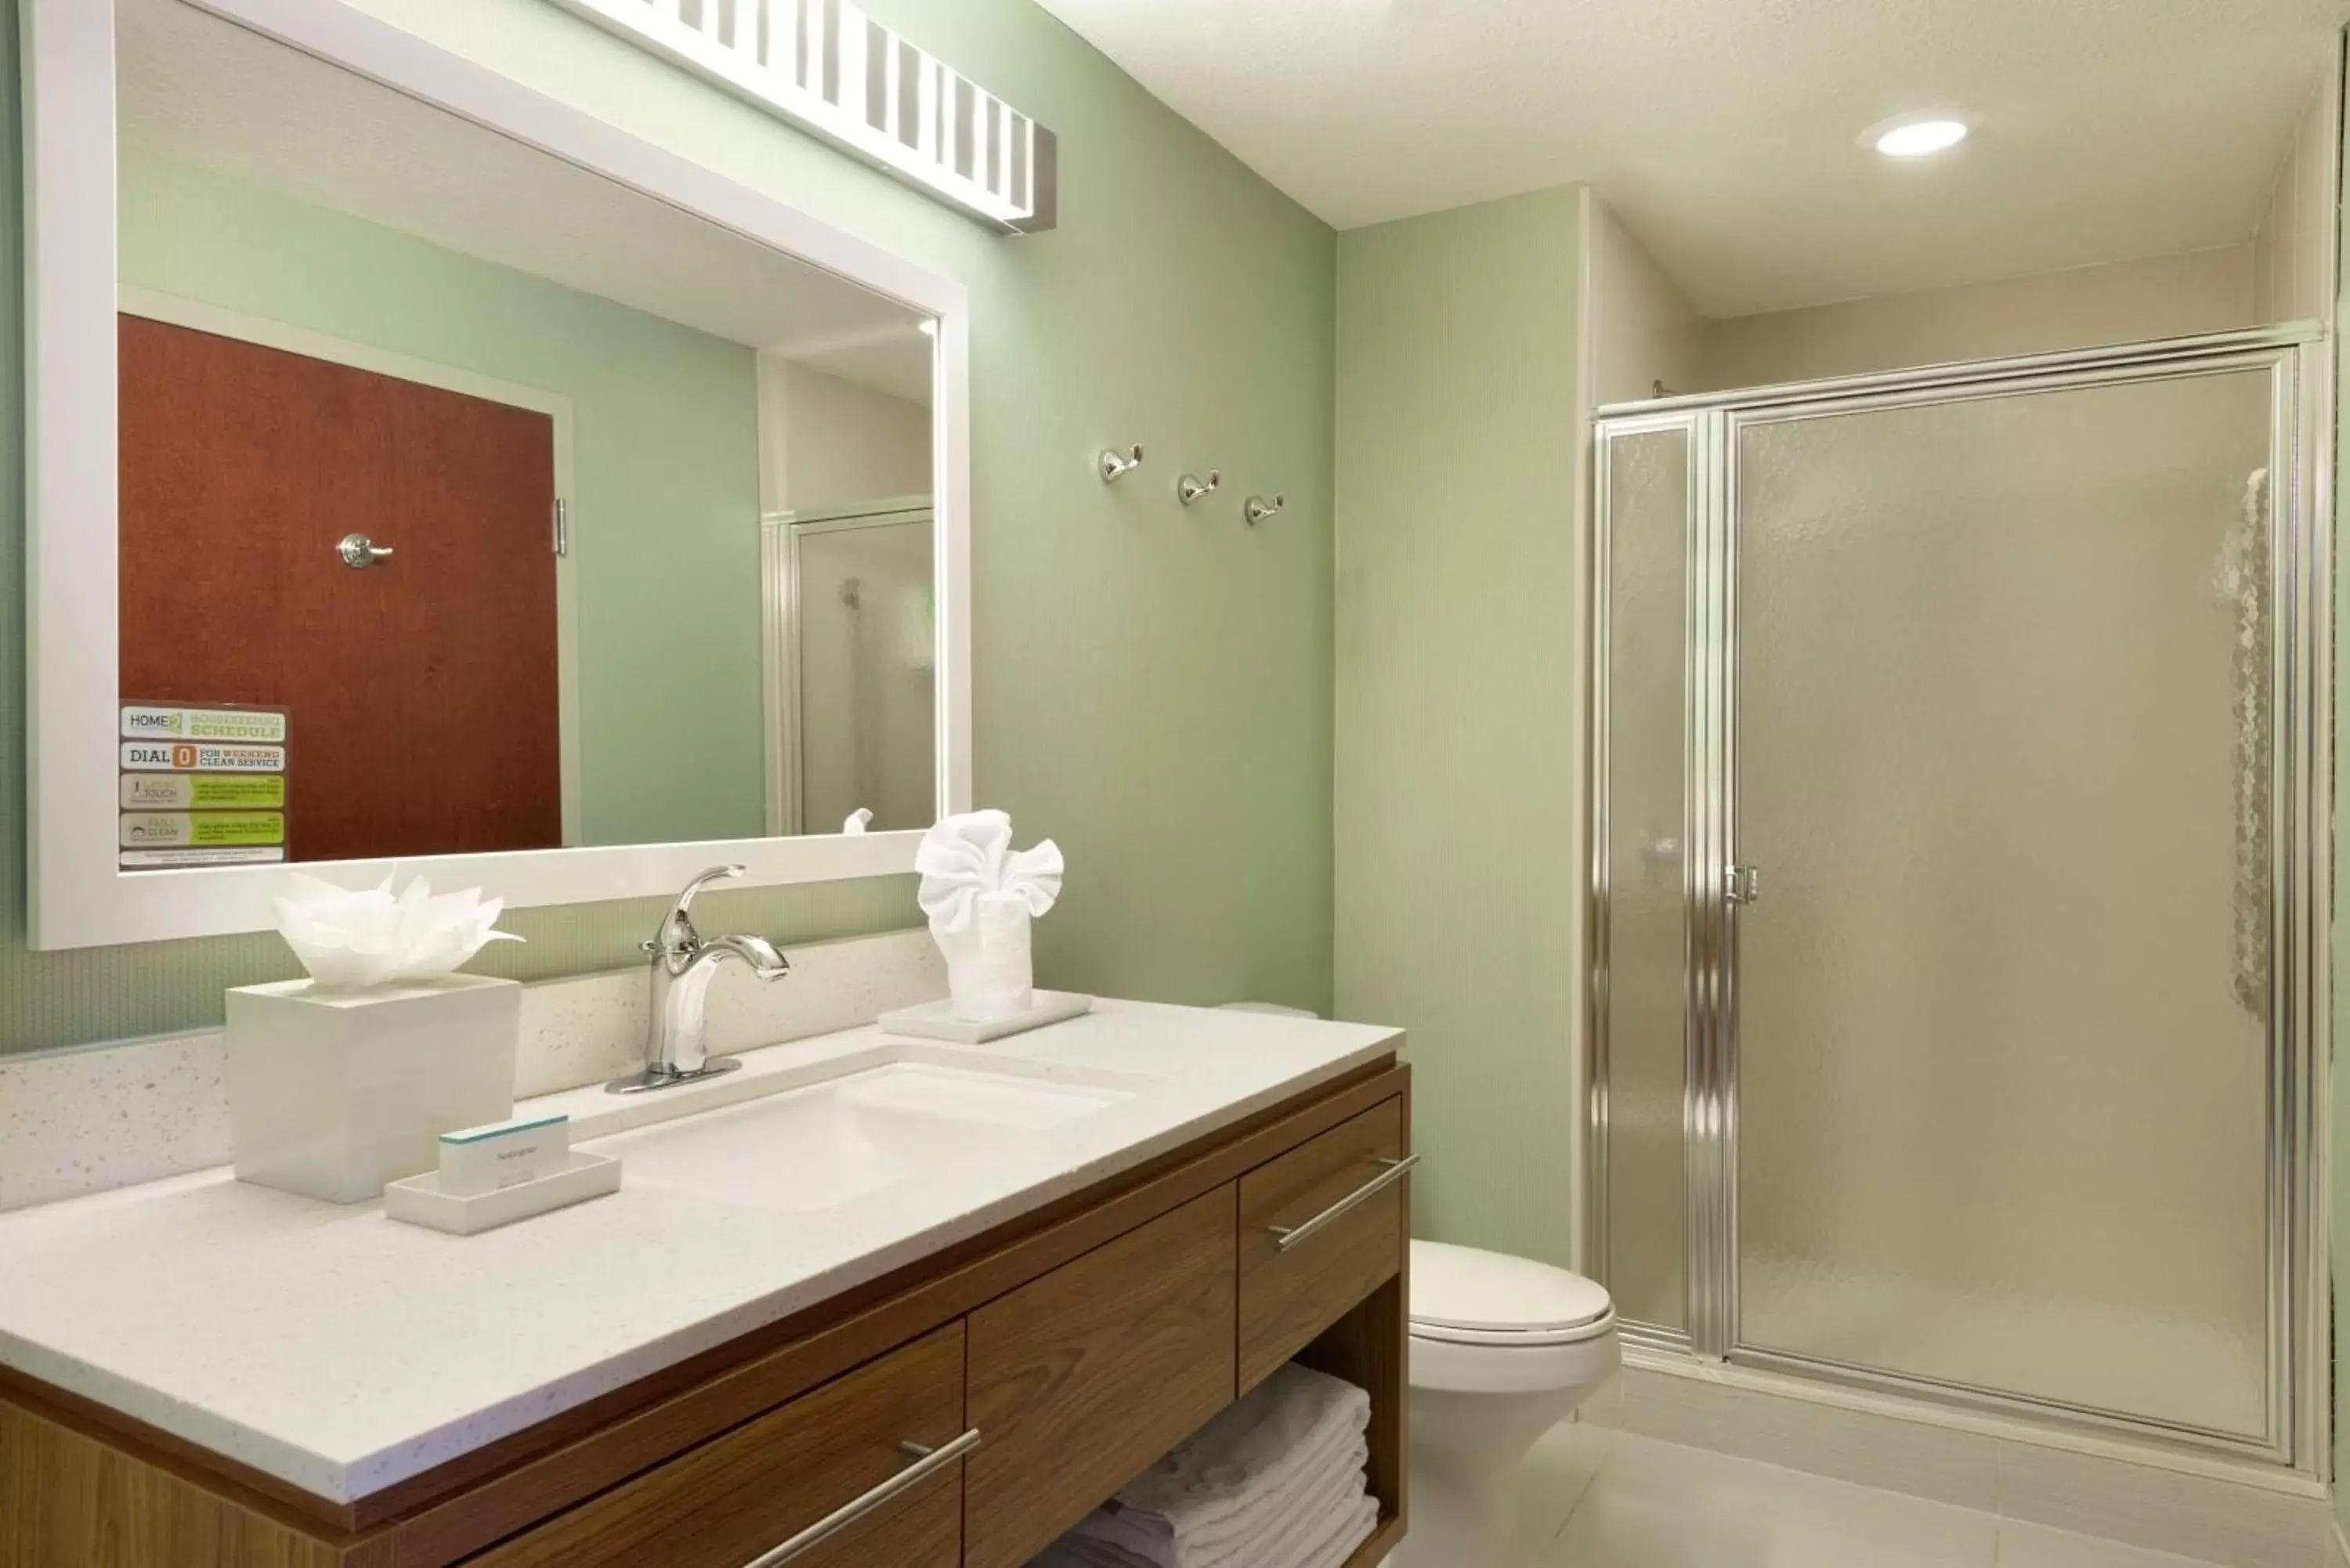 Bathroom in Home2 Suites by Hilton Florida City